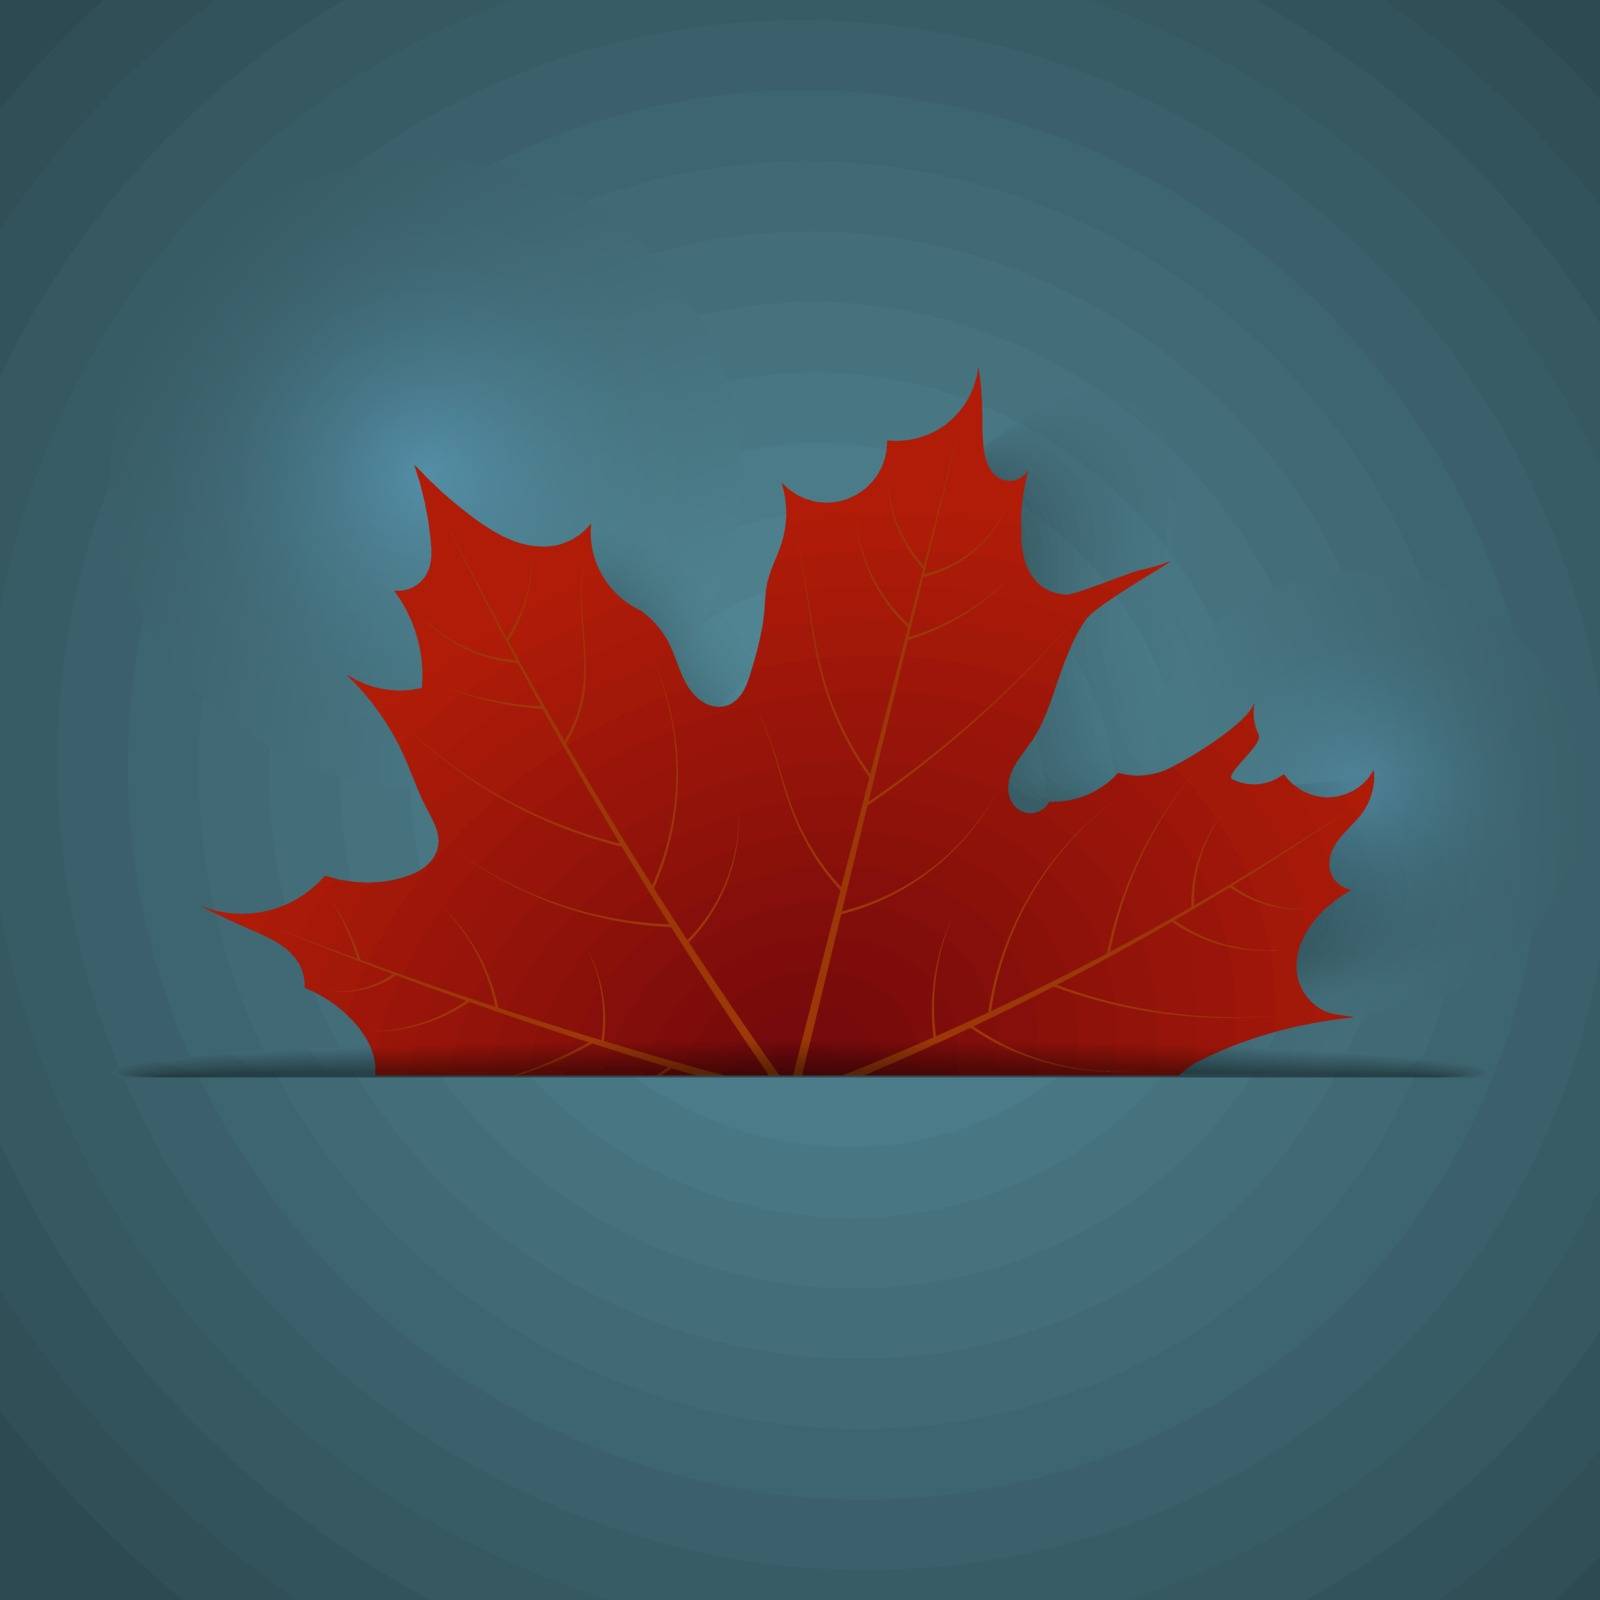 Red maple leaf on a blue background by Larser